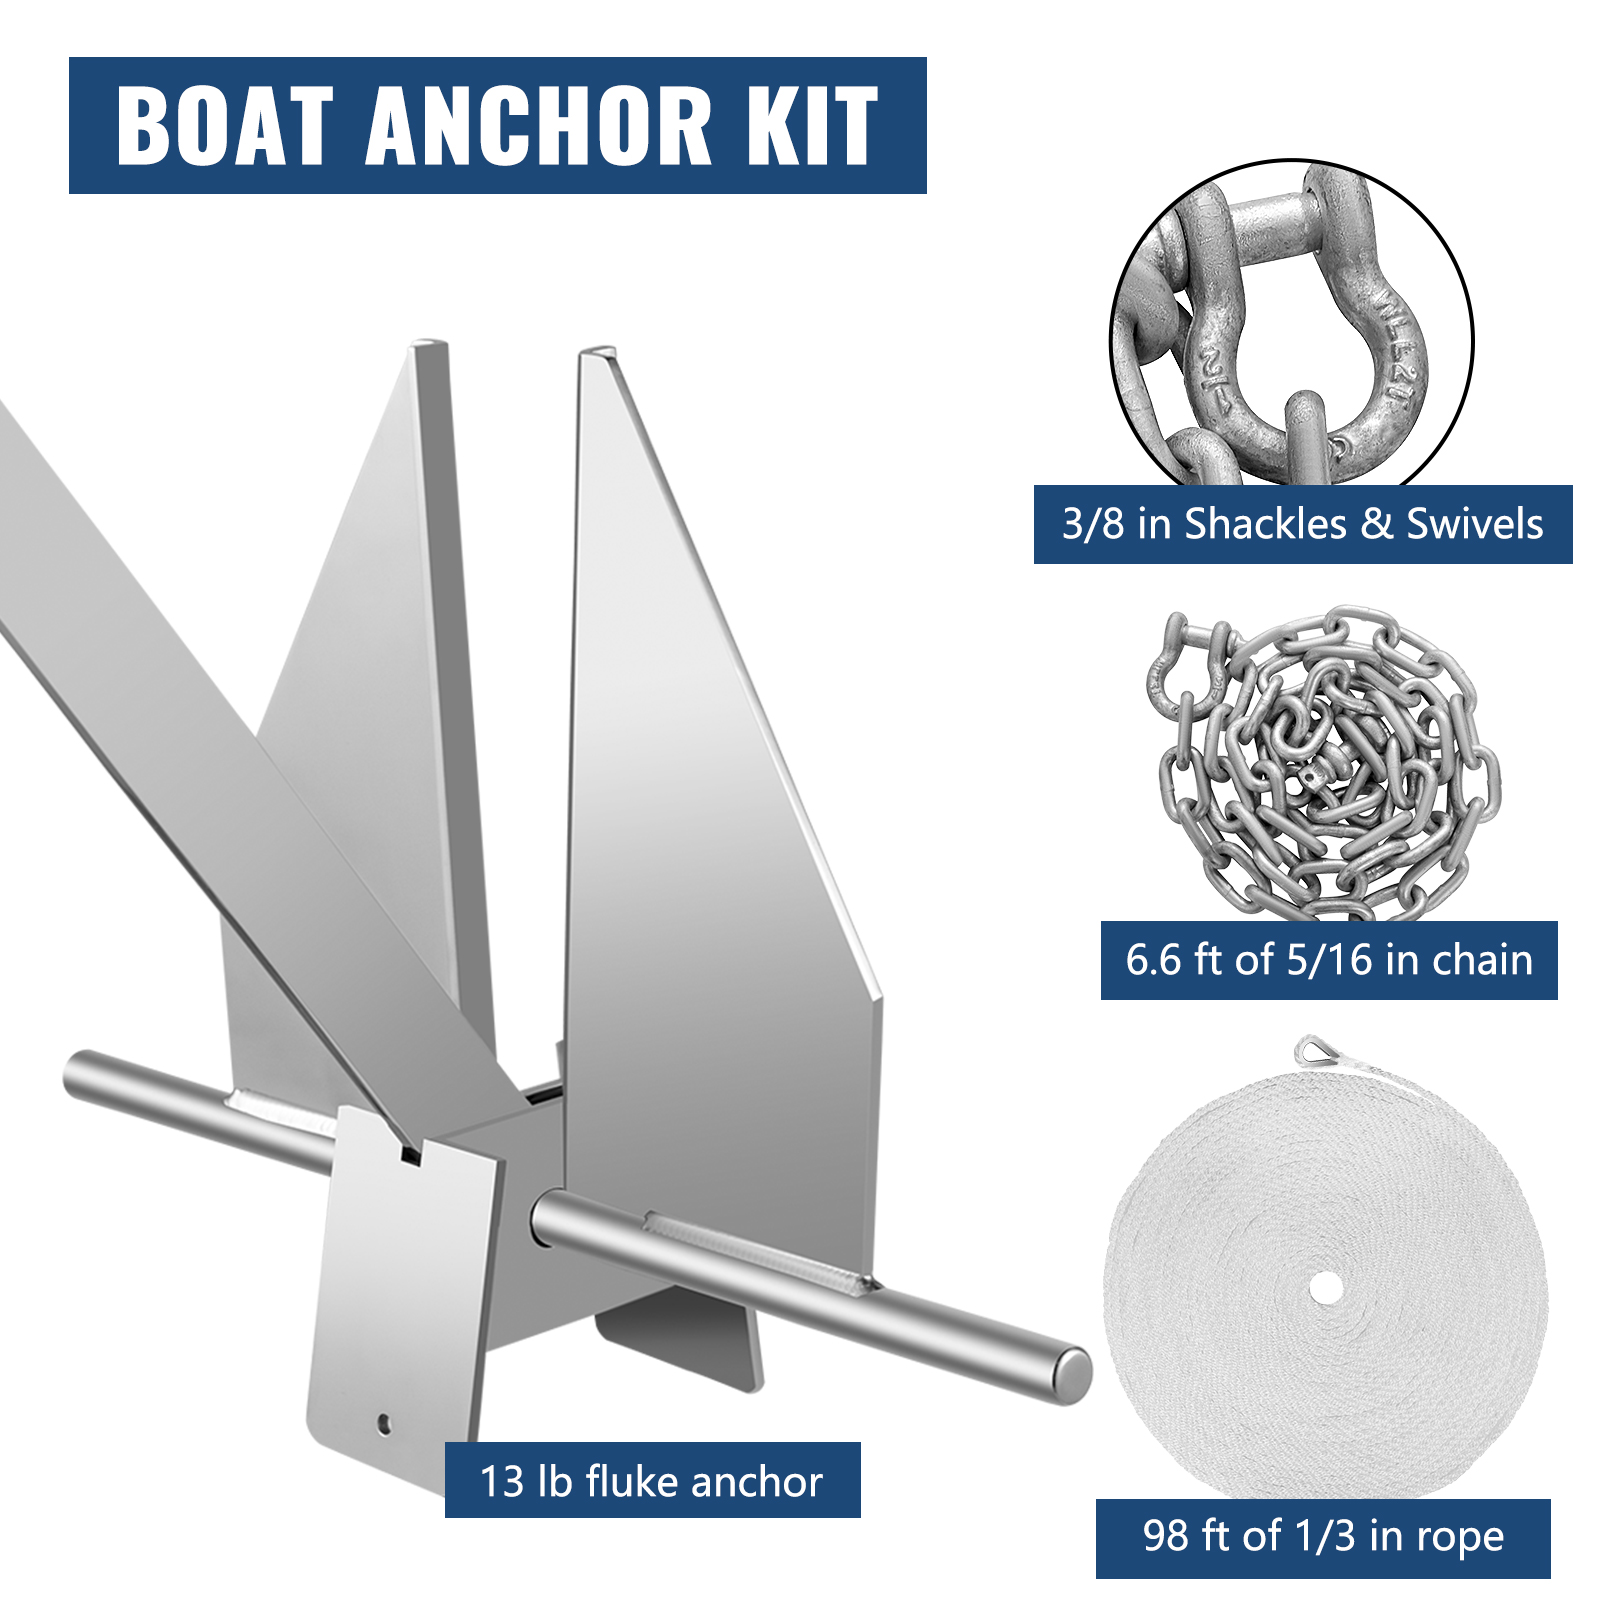 VEVOR Boat Anchor Kit 13 lb Fluke Style Anchor, Hot Dipped Galvanized Steel  Fluke Anchor, Marine Anchor with Anchor, Rope, Shackles, Chain for Boat  Mooring on the Beach, Boats from 13'-19